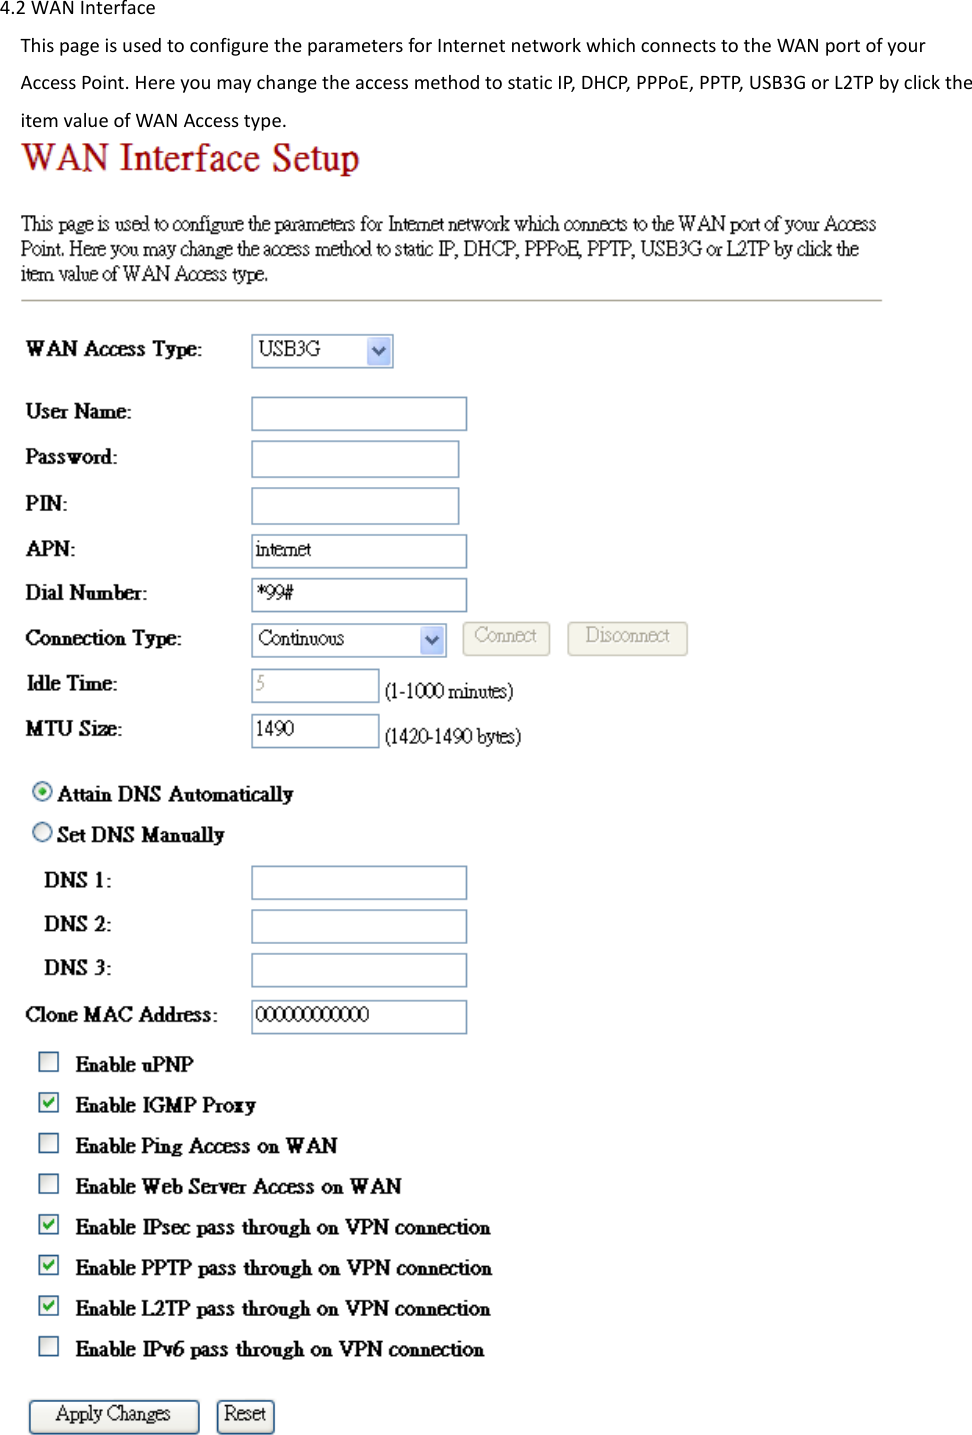     4.2 WAN Interface This page is used to configure the parameters for Internet network which connects to the WAN port of your Access Point. Here you may change the access method to static IP, DHCP, PPPoE, PPTP, USB3G or L2TP by click the item value of WAN Access type.     